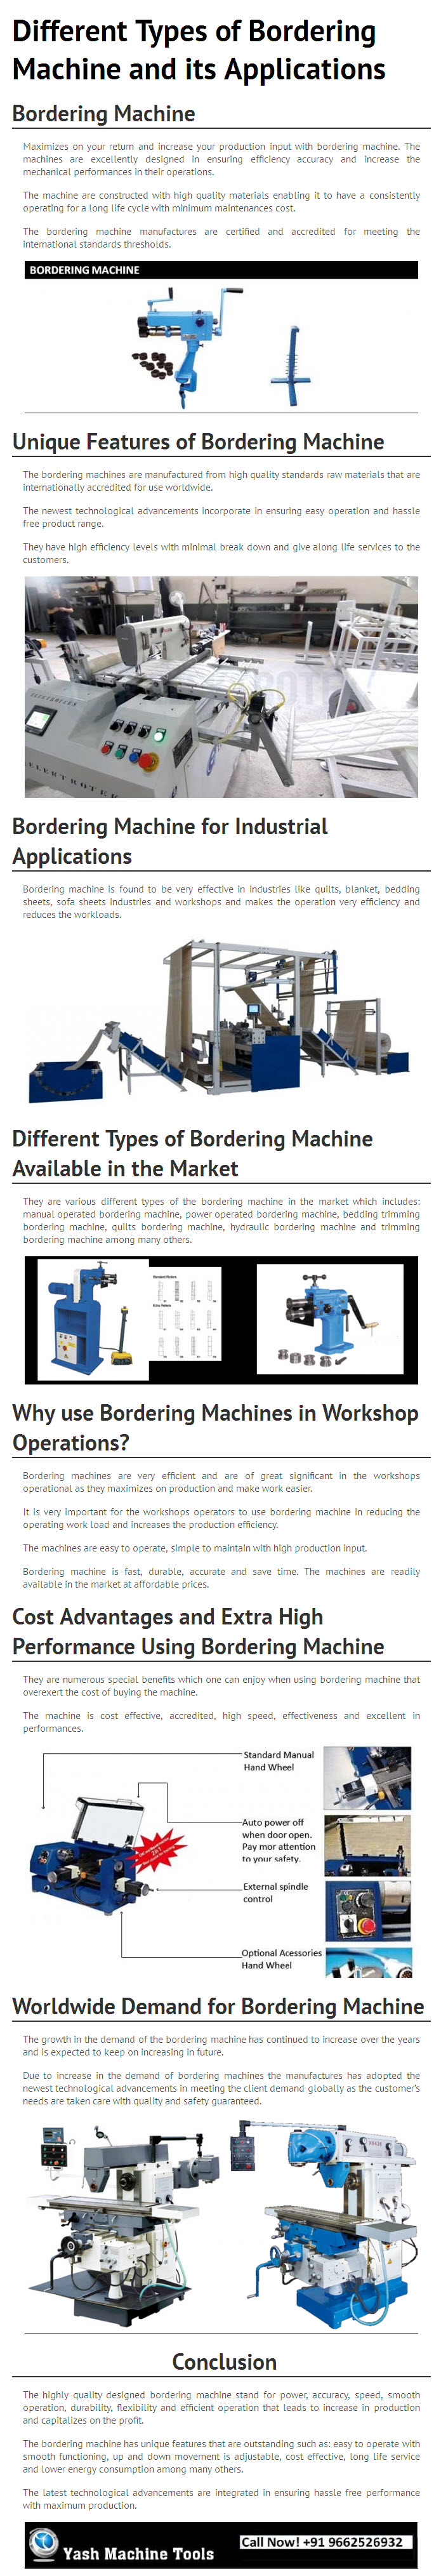 Types of Bordering Machine and Applications